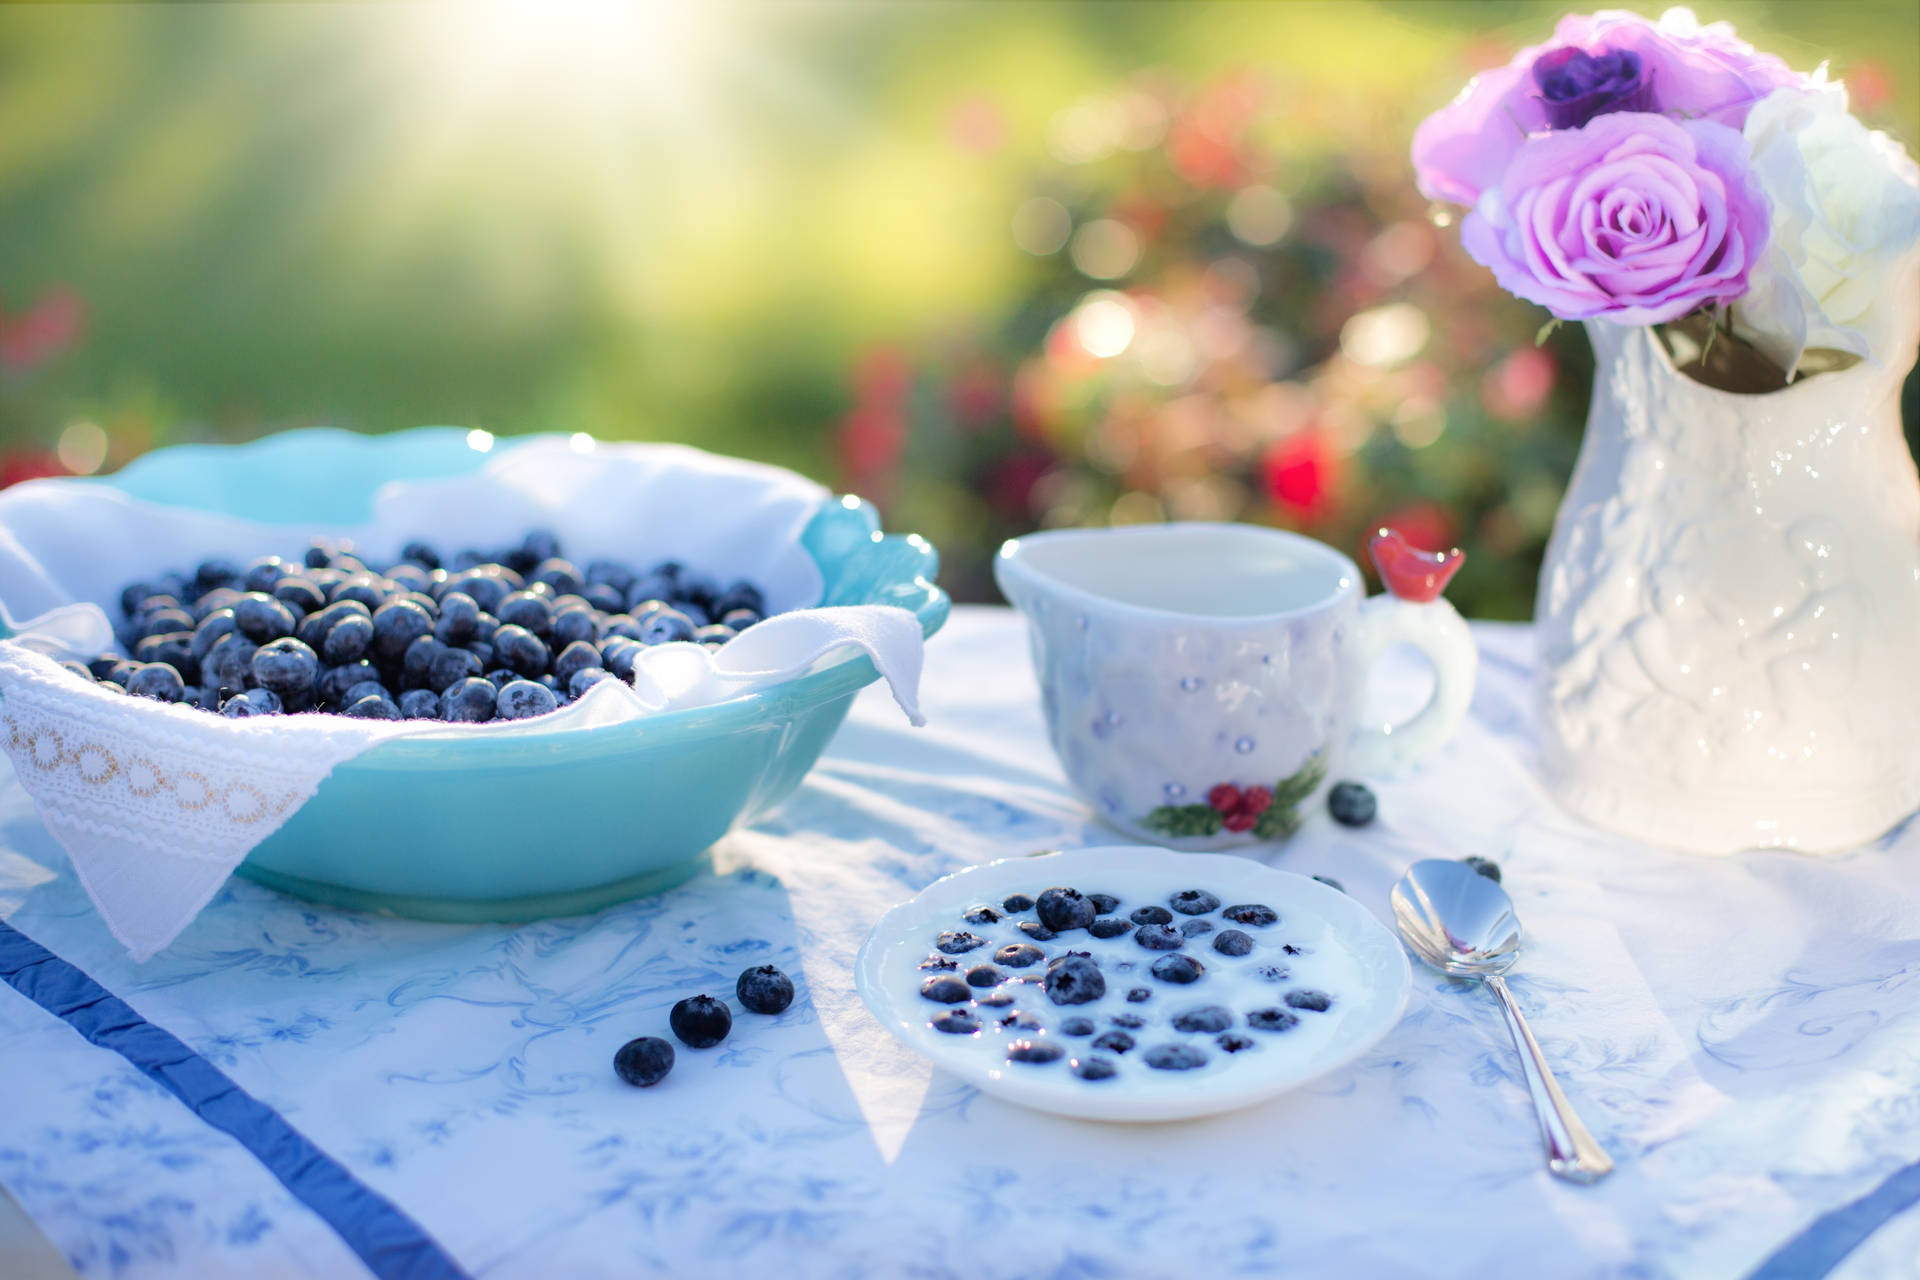 Delectable Fresh Blueberries For A Healthy Breakfast